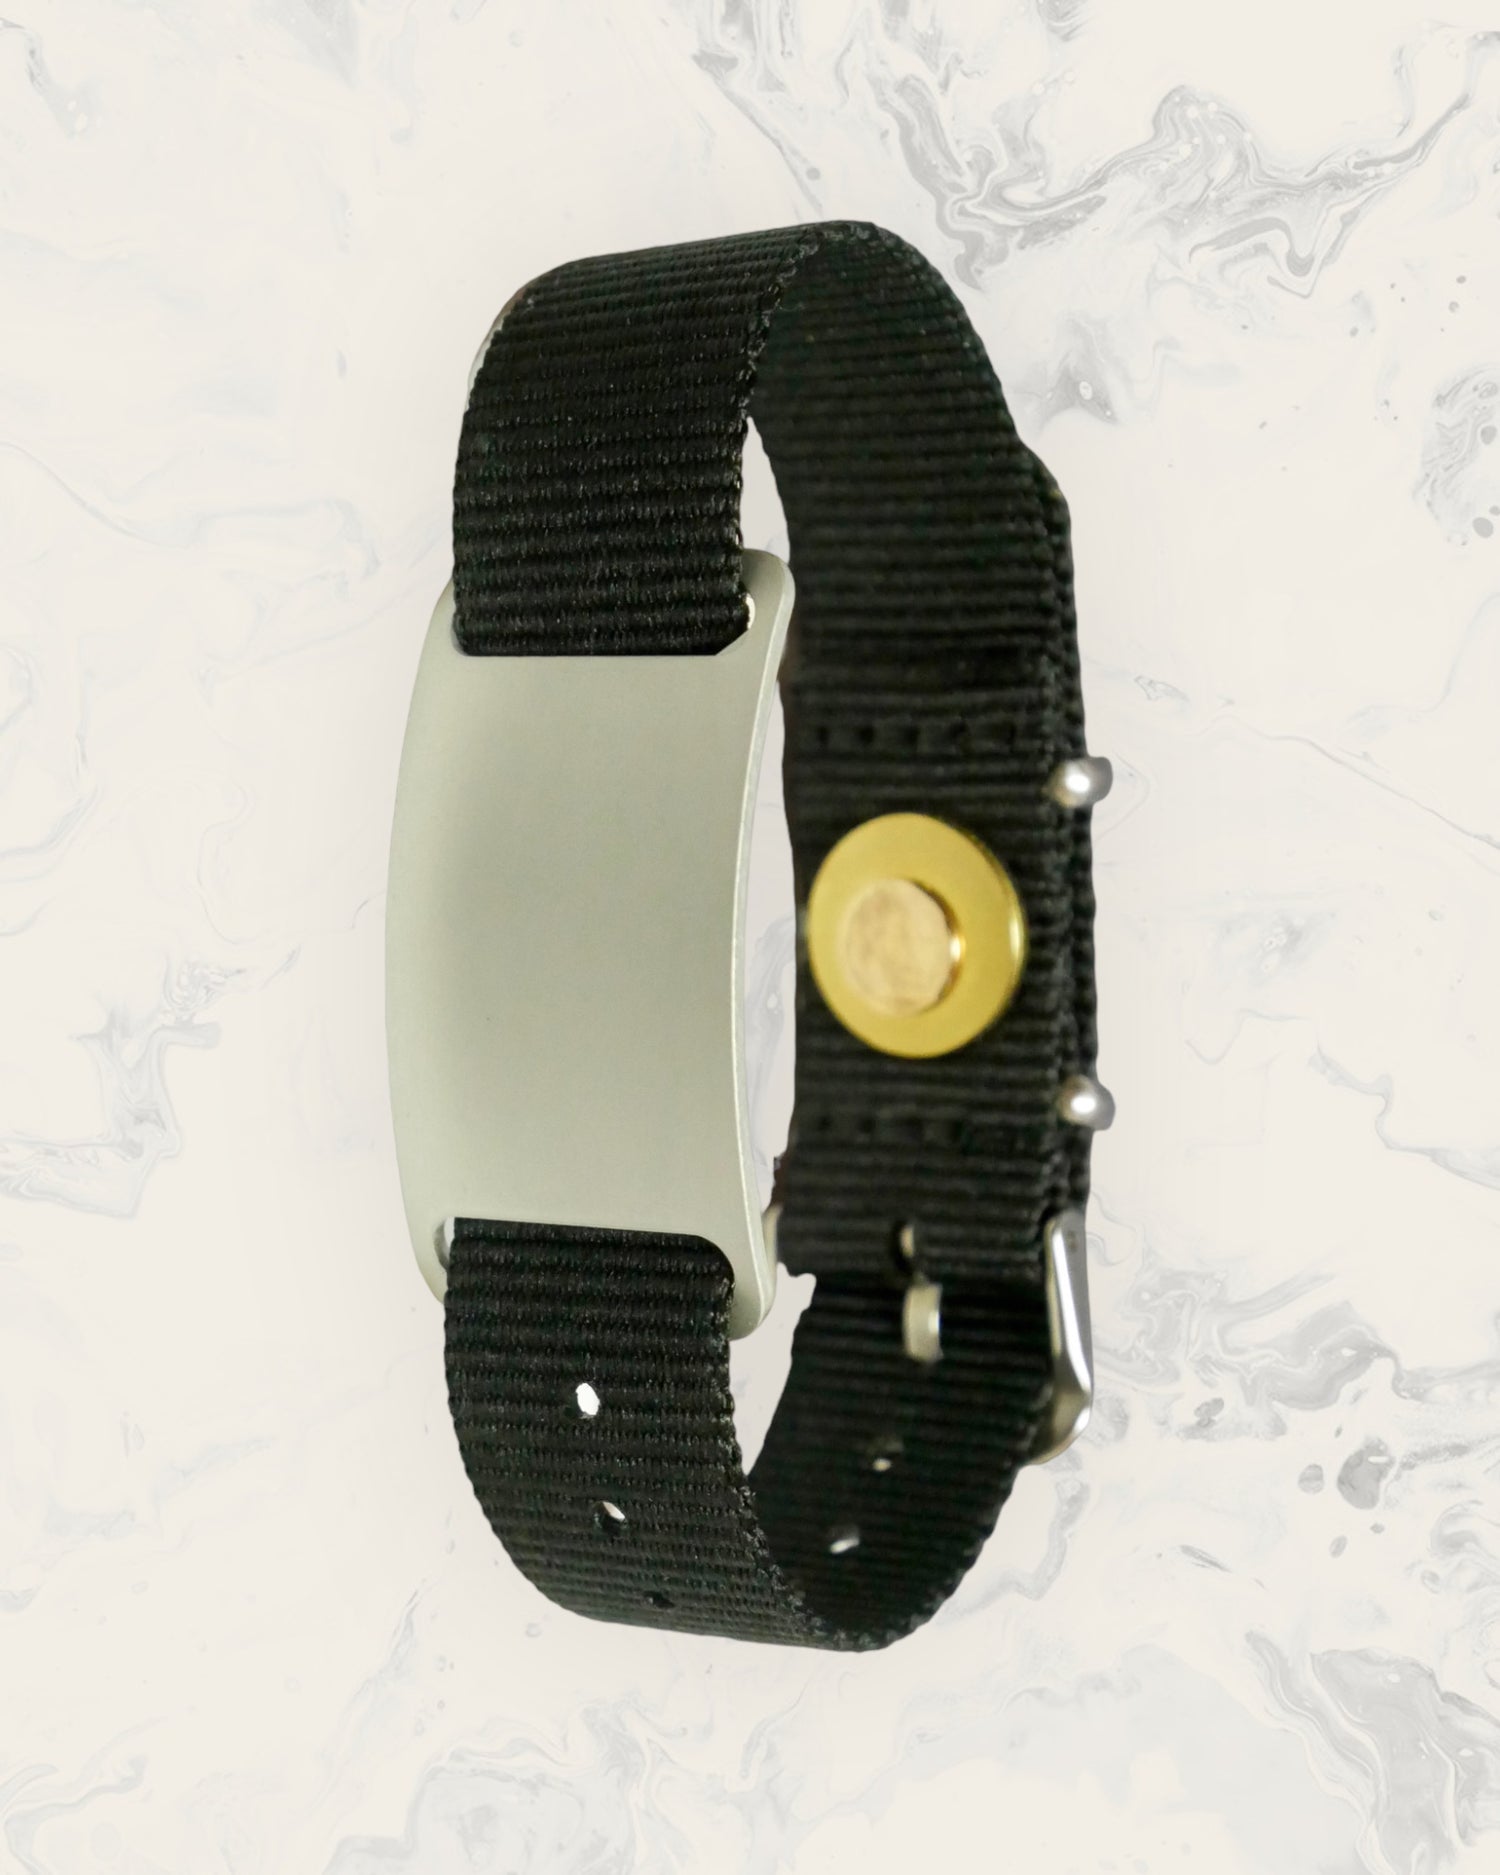 Natural Pain Relief and EMF Protection Bracelet Nylon Band Color Black with a Silver Slider